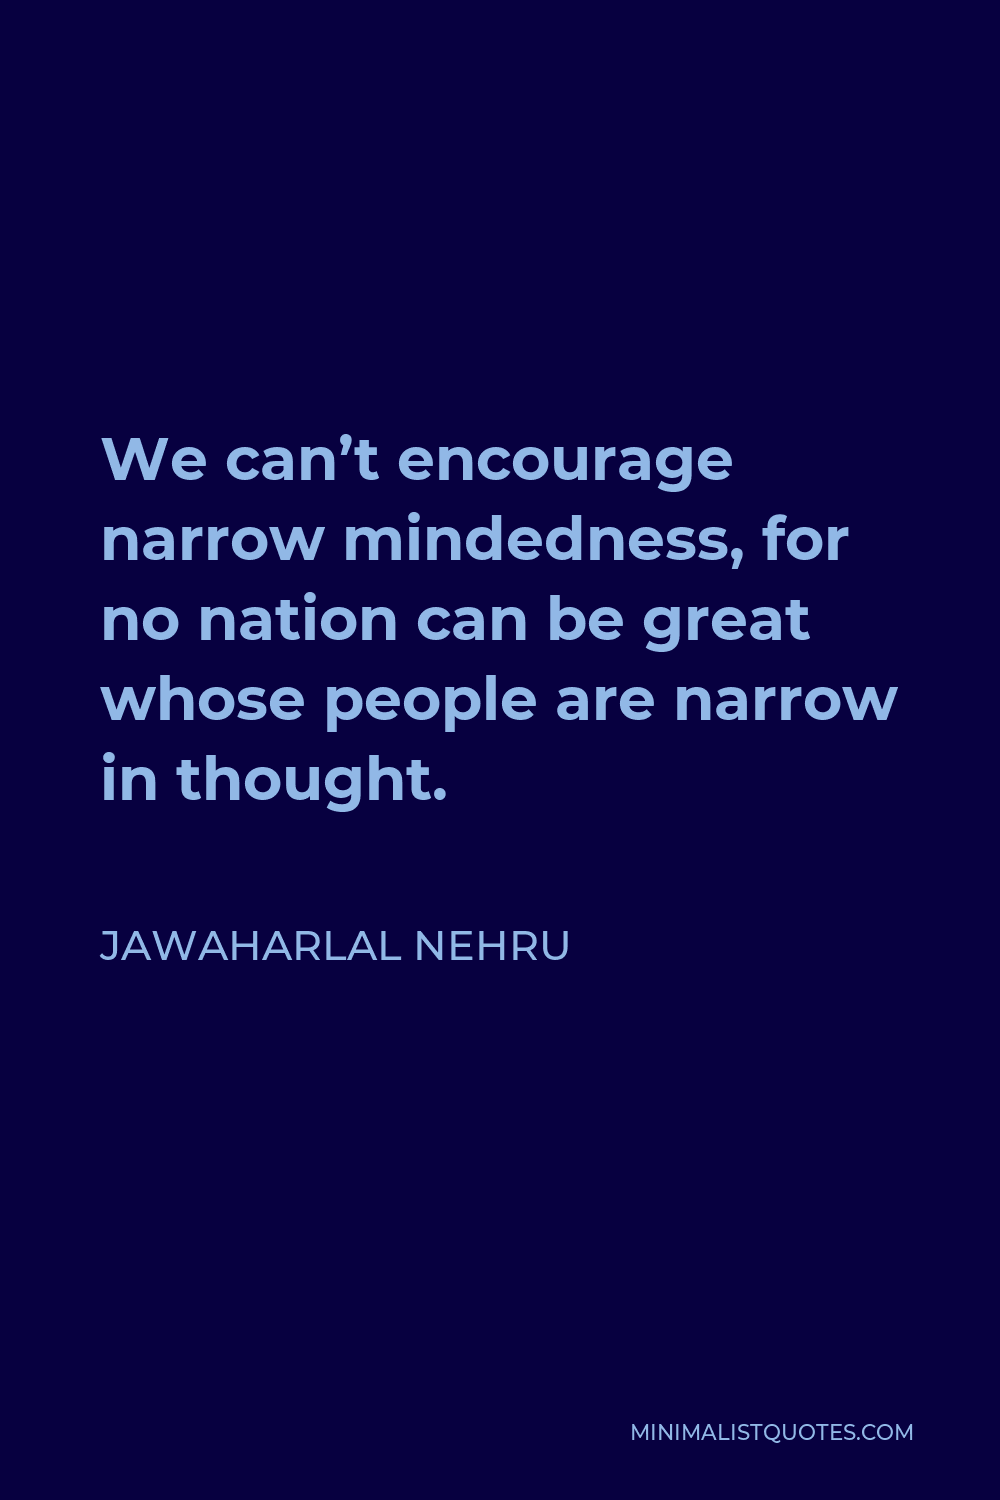 Jawaharlal Nehru Quote - We can’t encourage narrow mindedness, for no nation can be great whose people are narrow in thought.